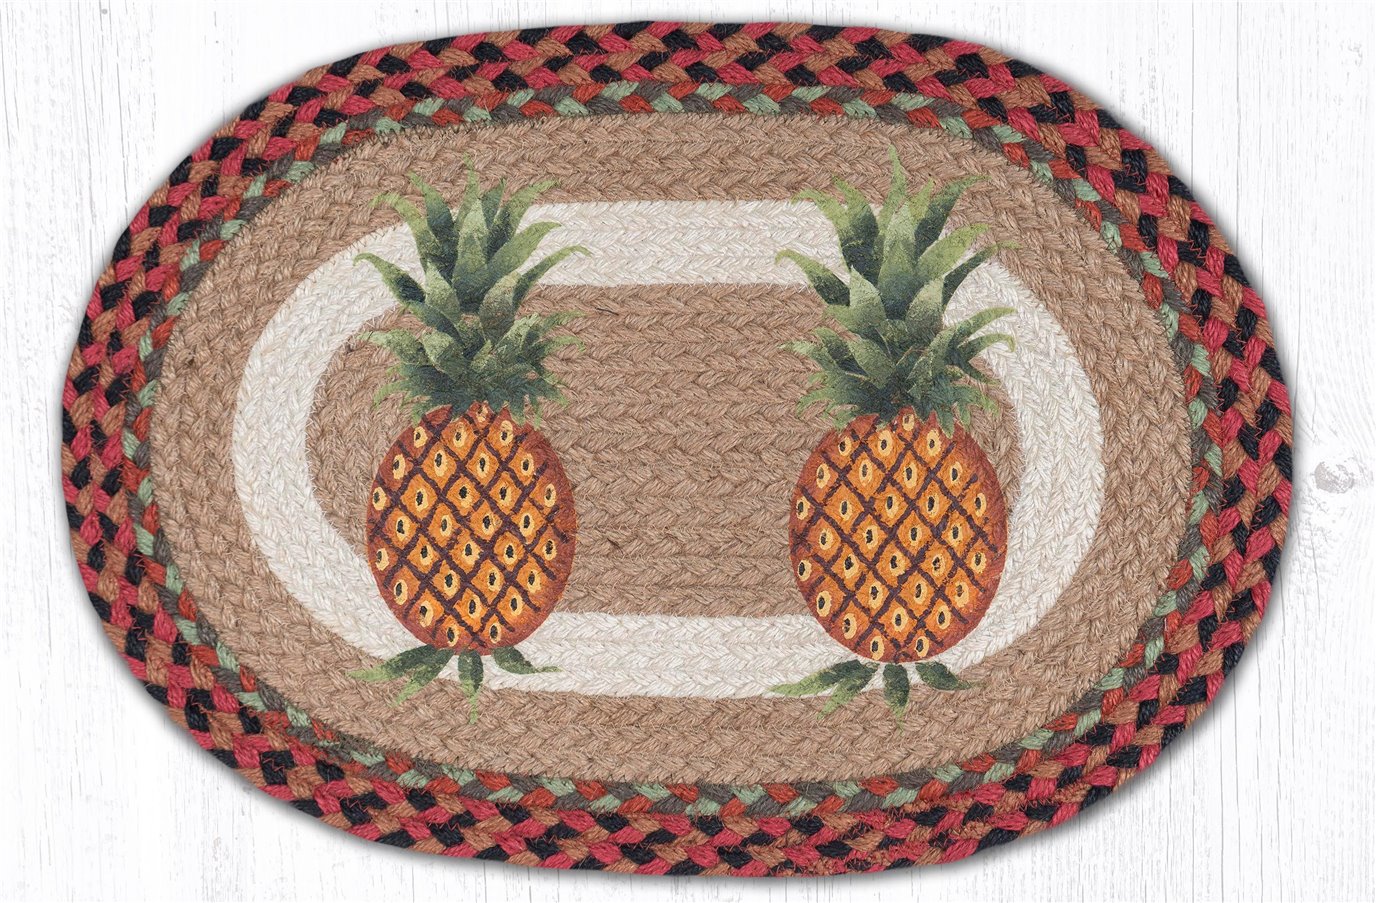 Pineapple Oval Braided Placemat 13"x19"